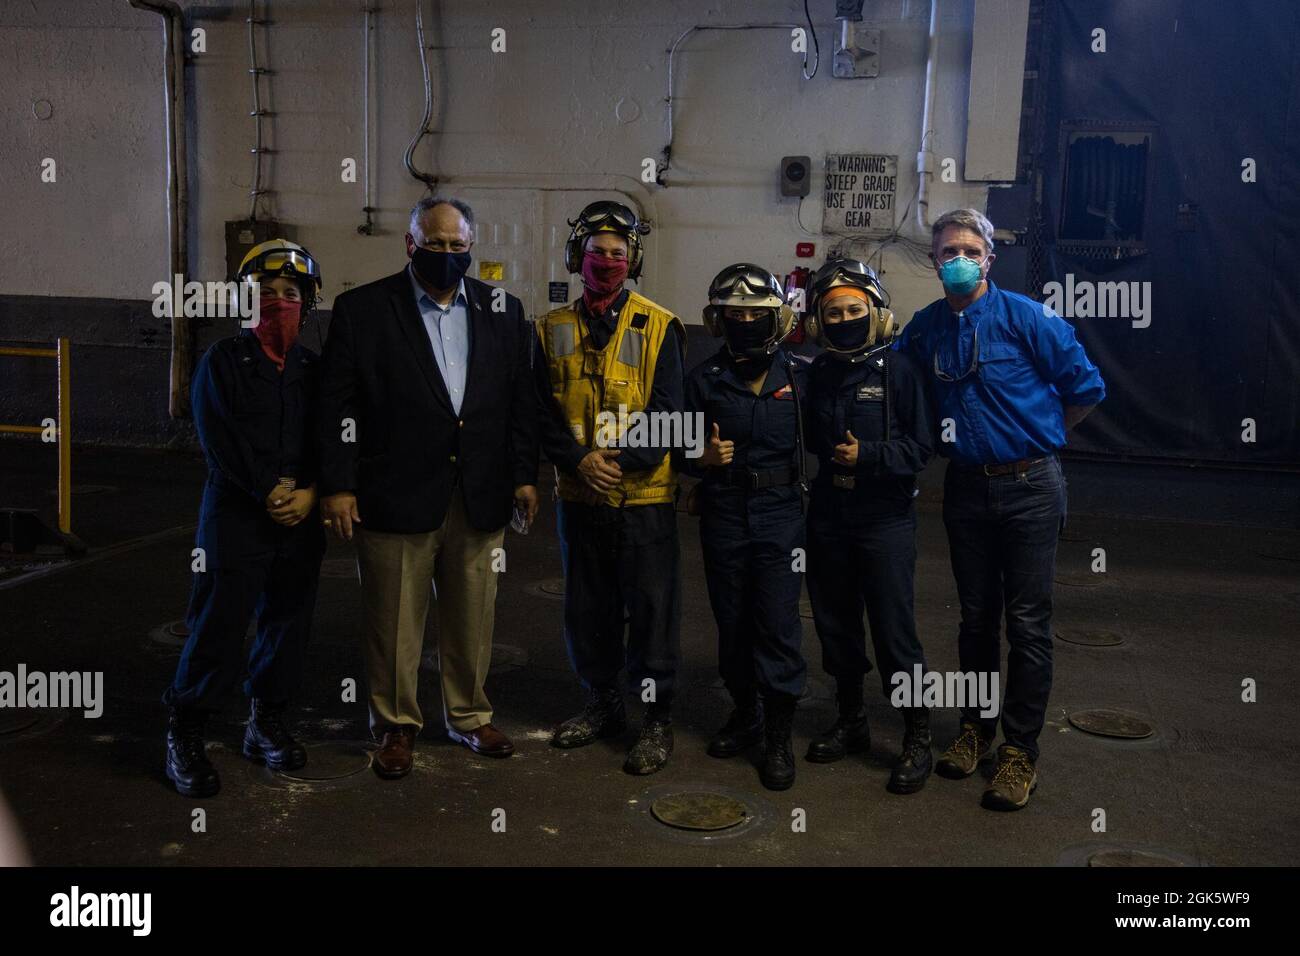 U.S. Secretary of the Navy Carlos Del Toro, and U.S. Representative Rob Wittman (R-VA), pose for a picture with Sailors aboard the USS Kearsarge during Large Scale Exercise (LSE) 2021, off the coast of North Carolina, Aug. 10, 2021. II MEF is a maritime force inextricably linked to our Navy partners in U.S. 6th and 2nd Fleets, creating mutual interdependence with our Fleet counterparts leverages our collective capabilities and increases maritime lethality. LSE 2021 merges live and synthetic training capabilities to create an intense, robust training environment. Stock Photo